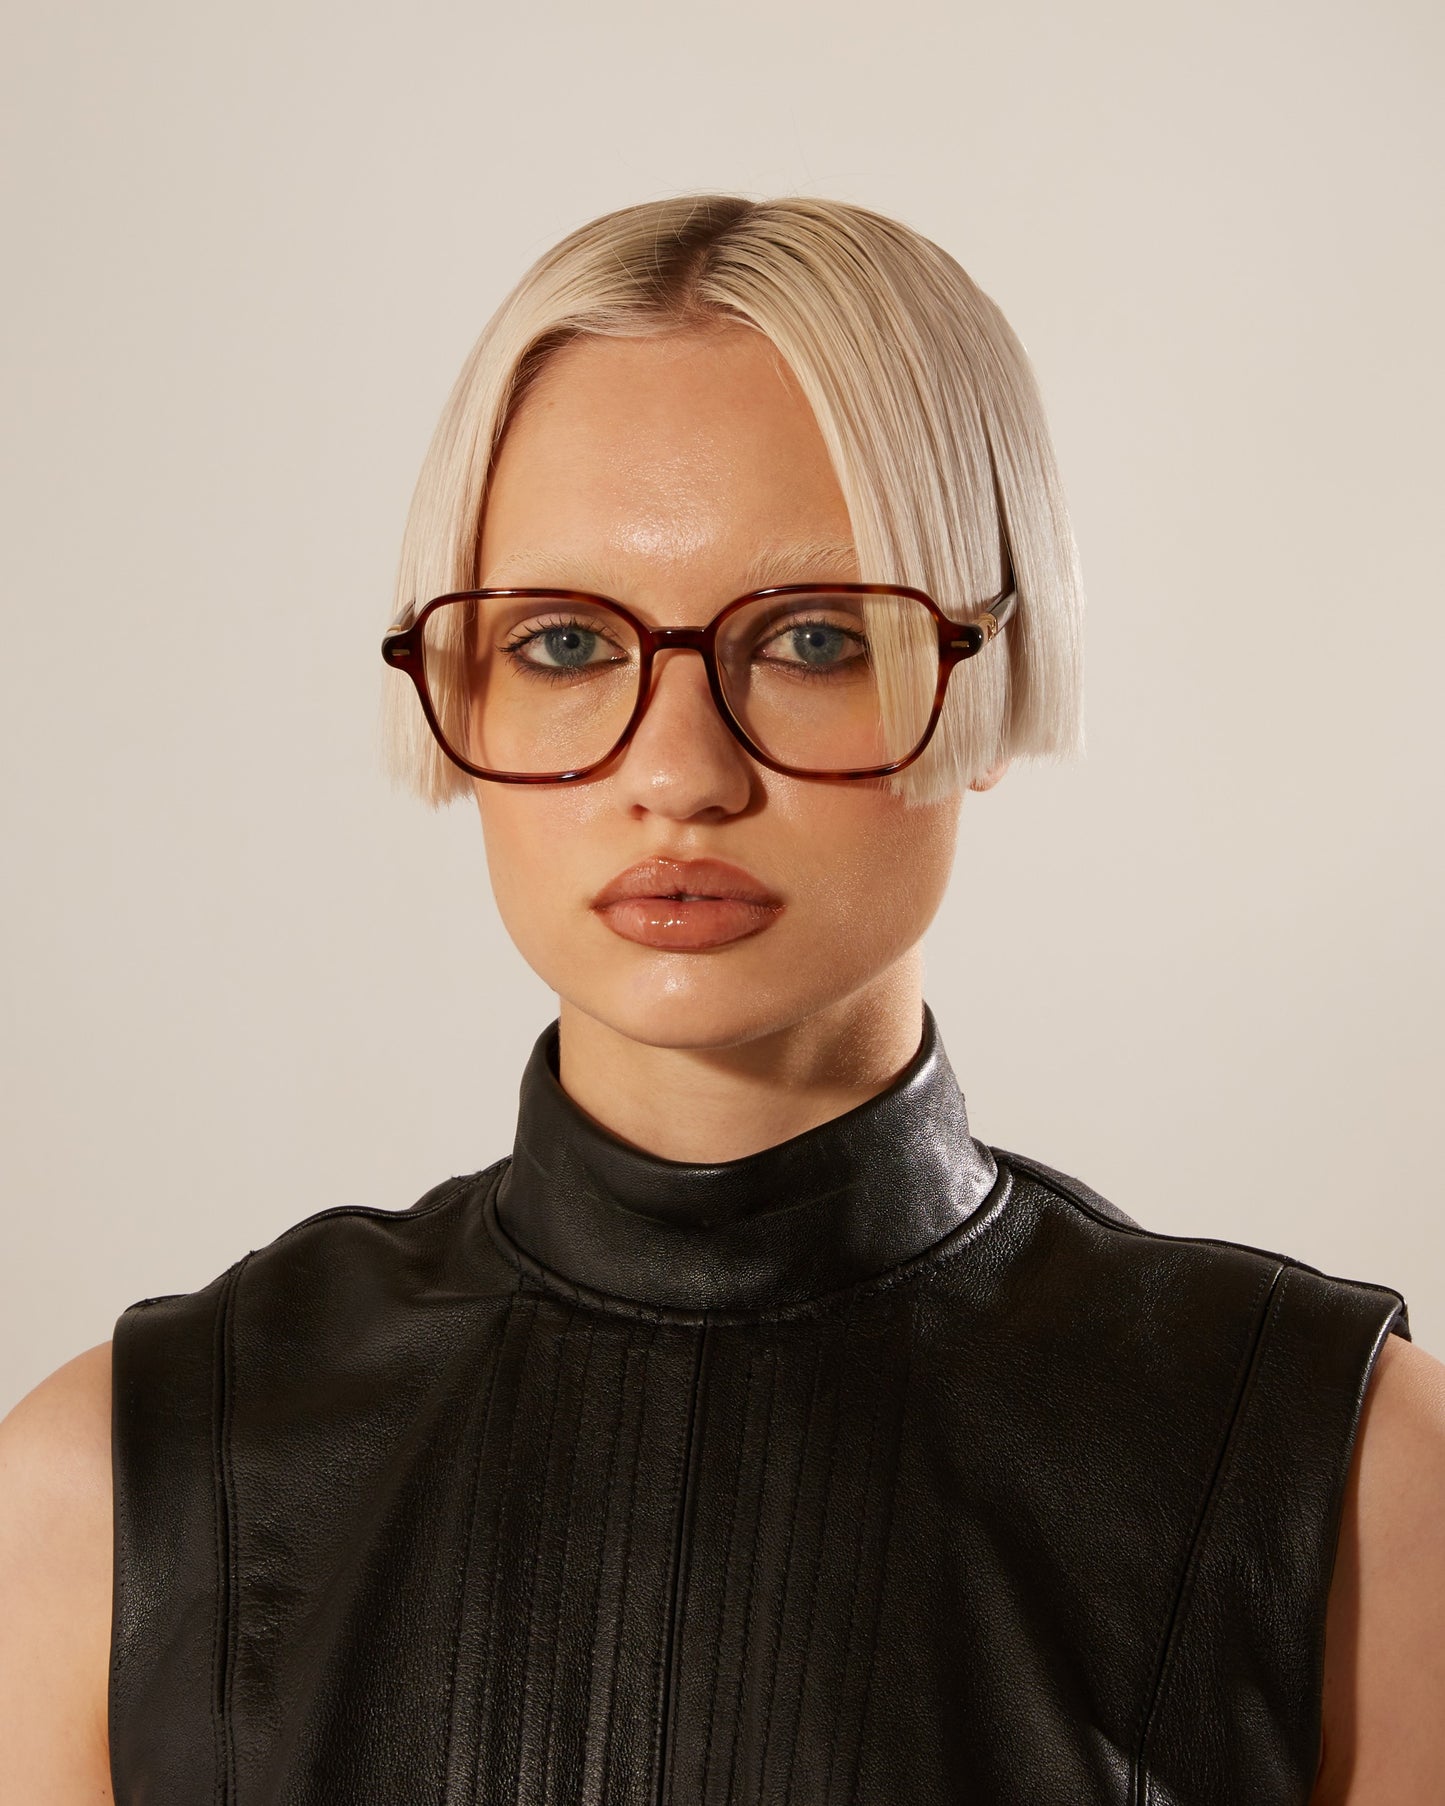 A woman with a short, blunt bob haircut wearing the Azure brown optical glasses by For Art’s Sake and a black sleeveless turtleneck, giving a serious look toward the camera against a neutral background.